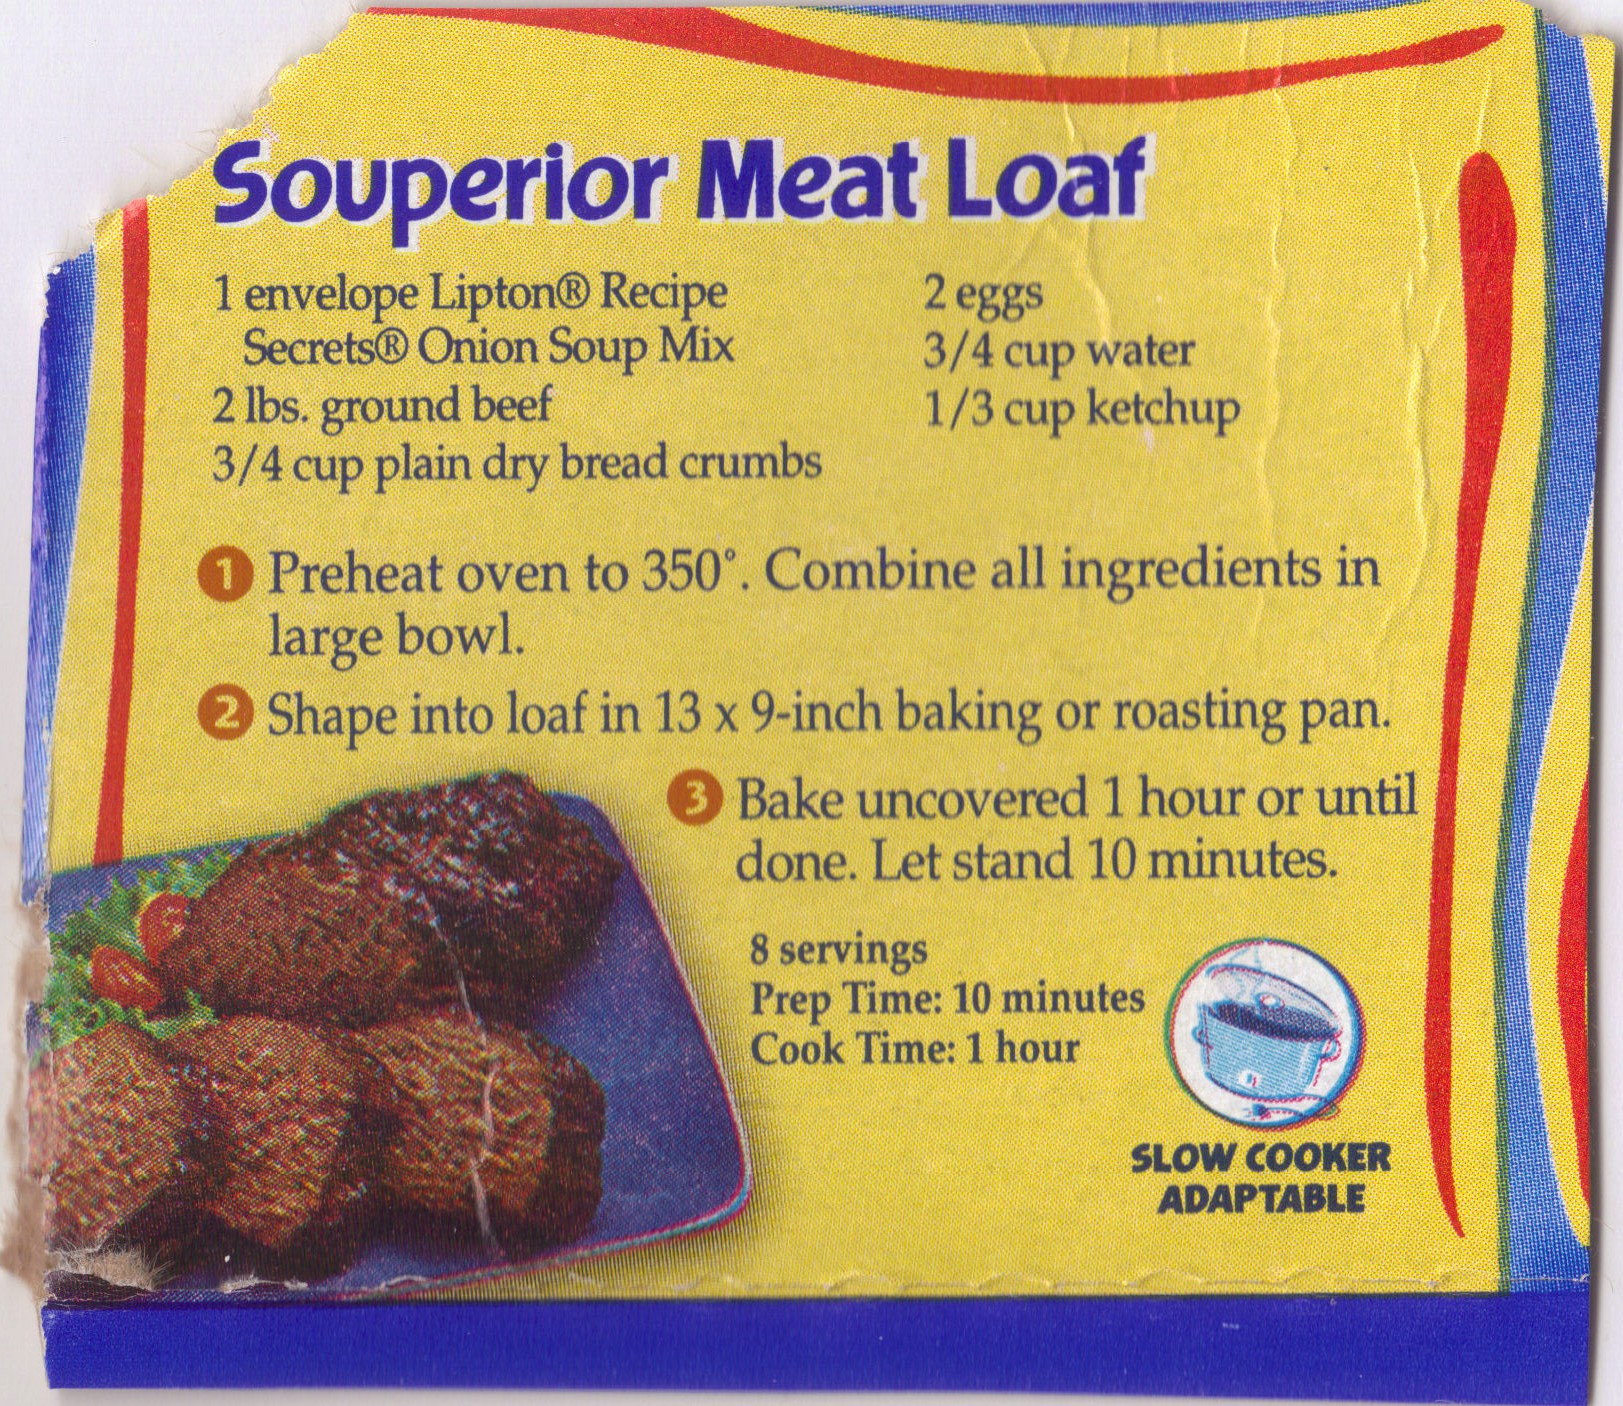 Lipton Souperior Meatloaf
 meatloaf with onion soup mix and evaporated milk